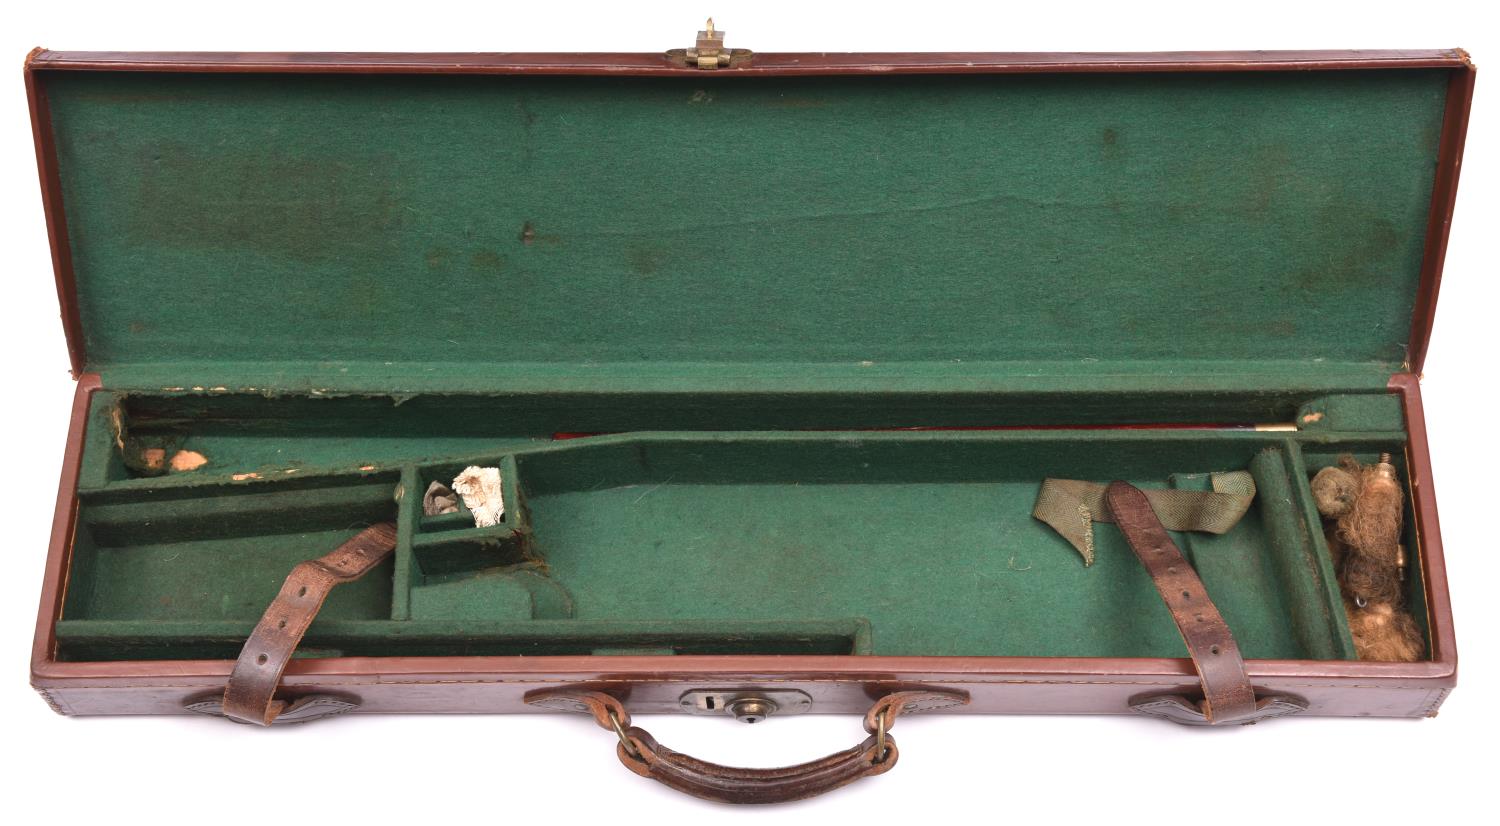 A fitted leather covered case for a DB shotgun with 28" - 30" barrels, with green baize lined